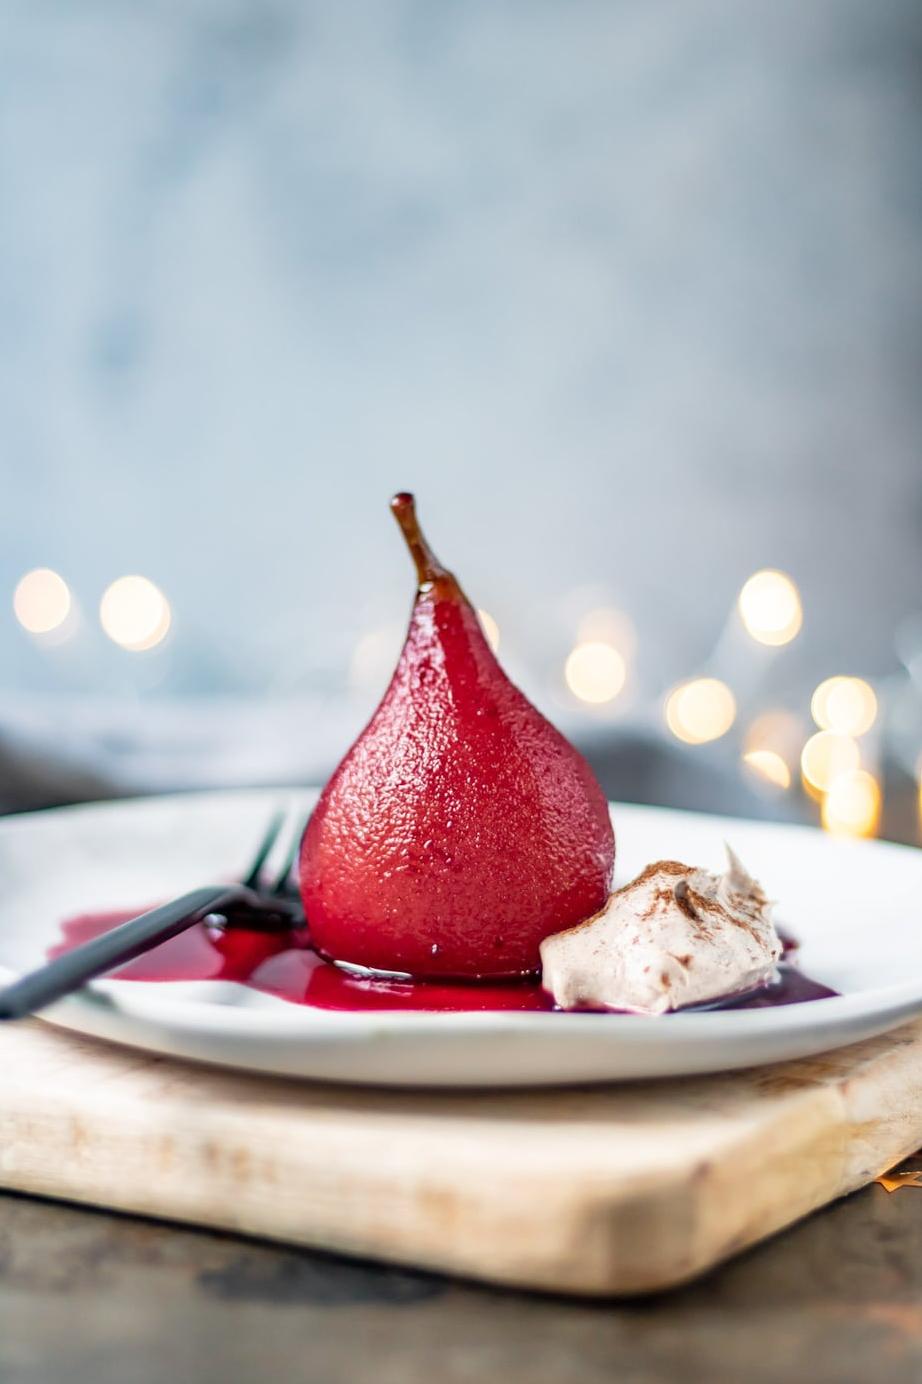  A delicious dessert doesn't have to be complicated. Try this simple recipe for pears poached in spiced wine.